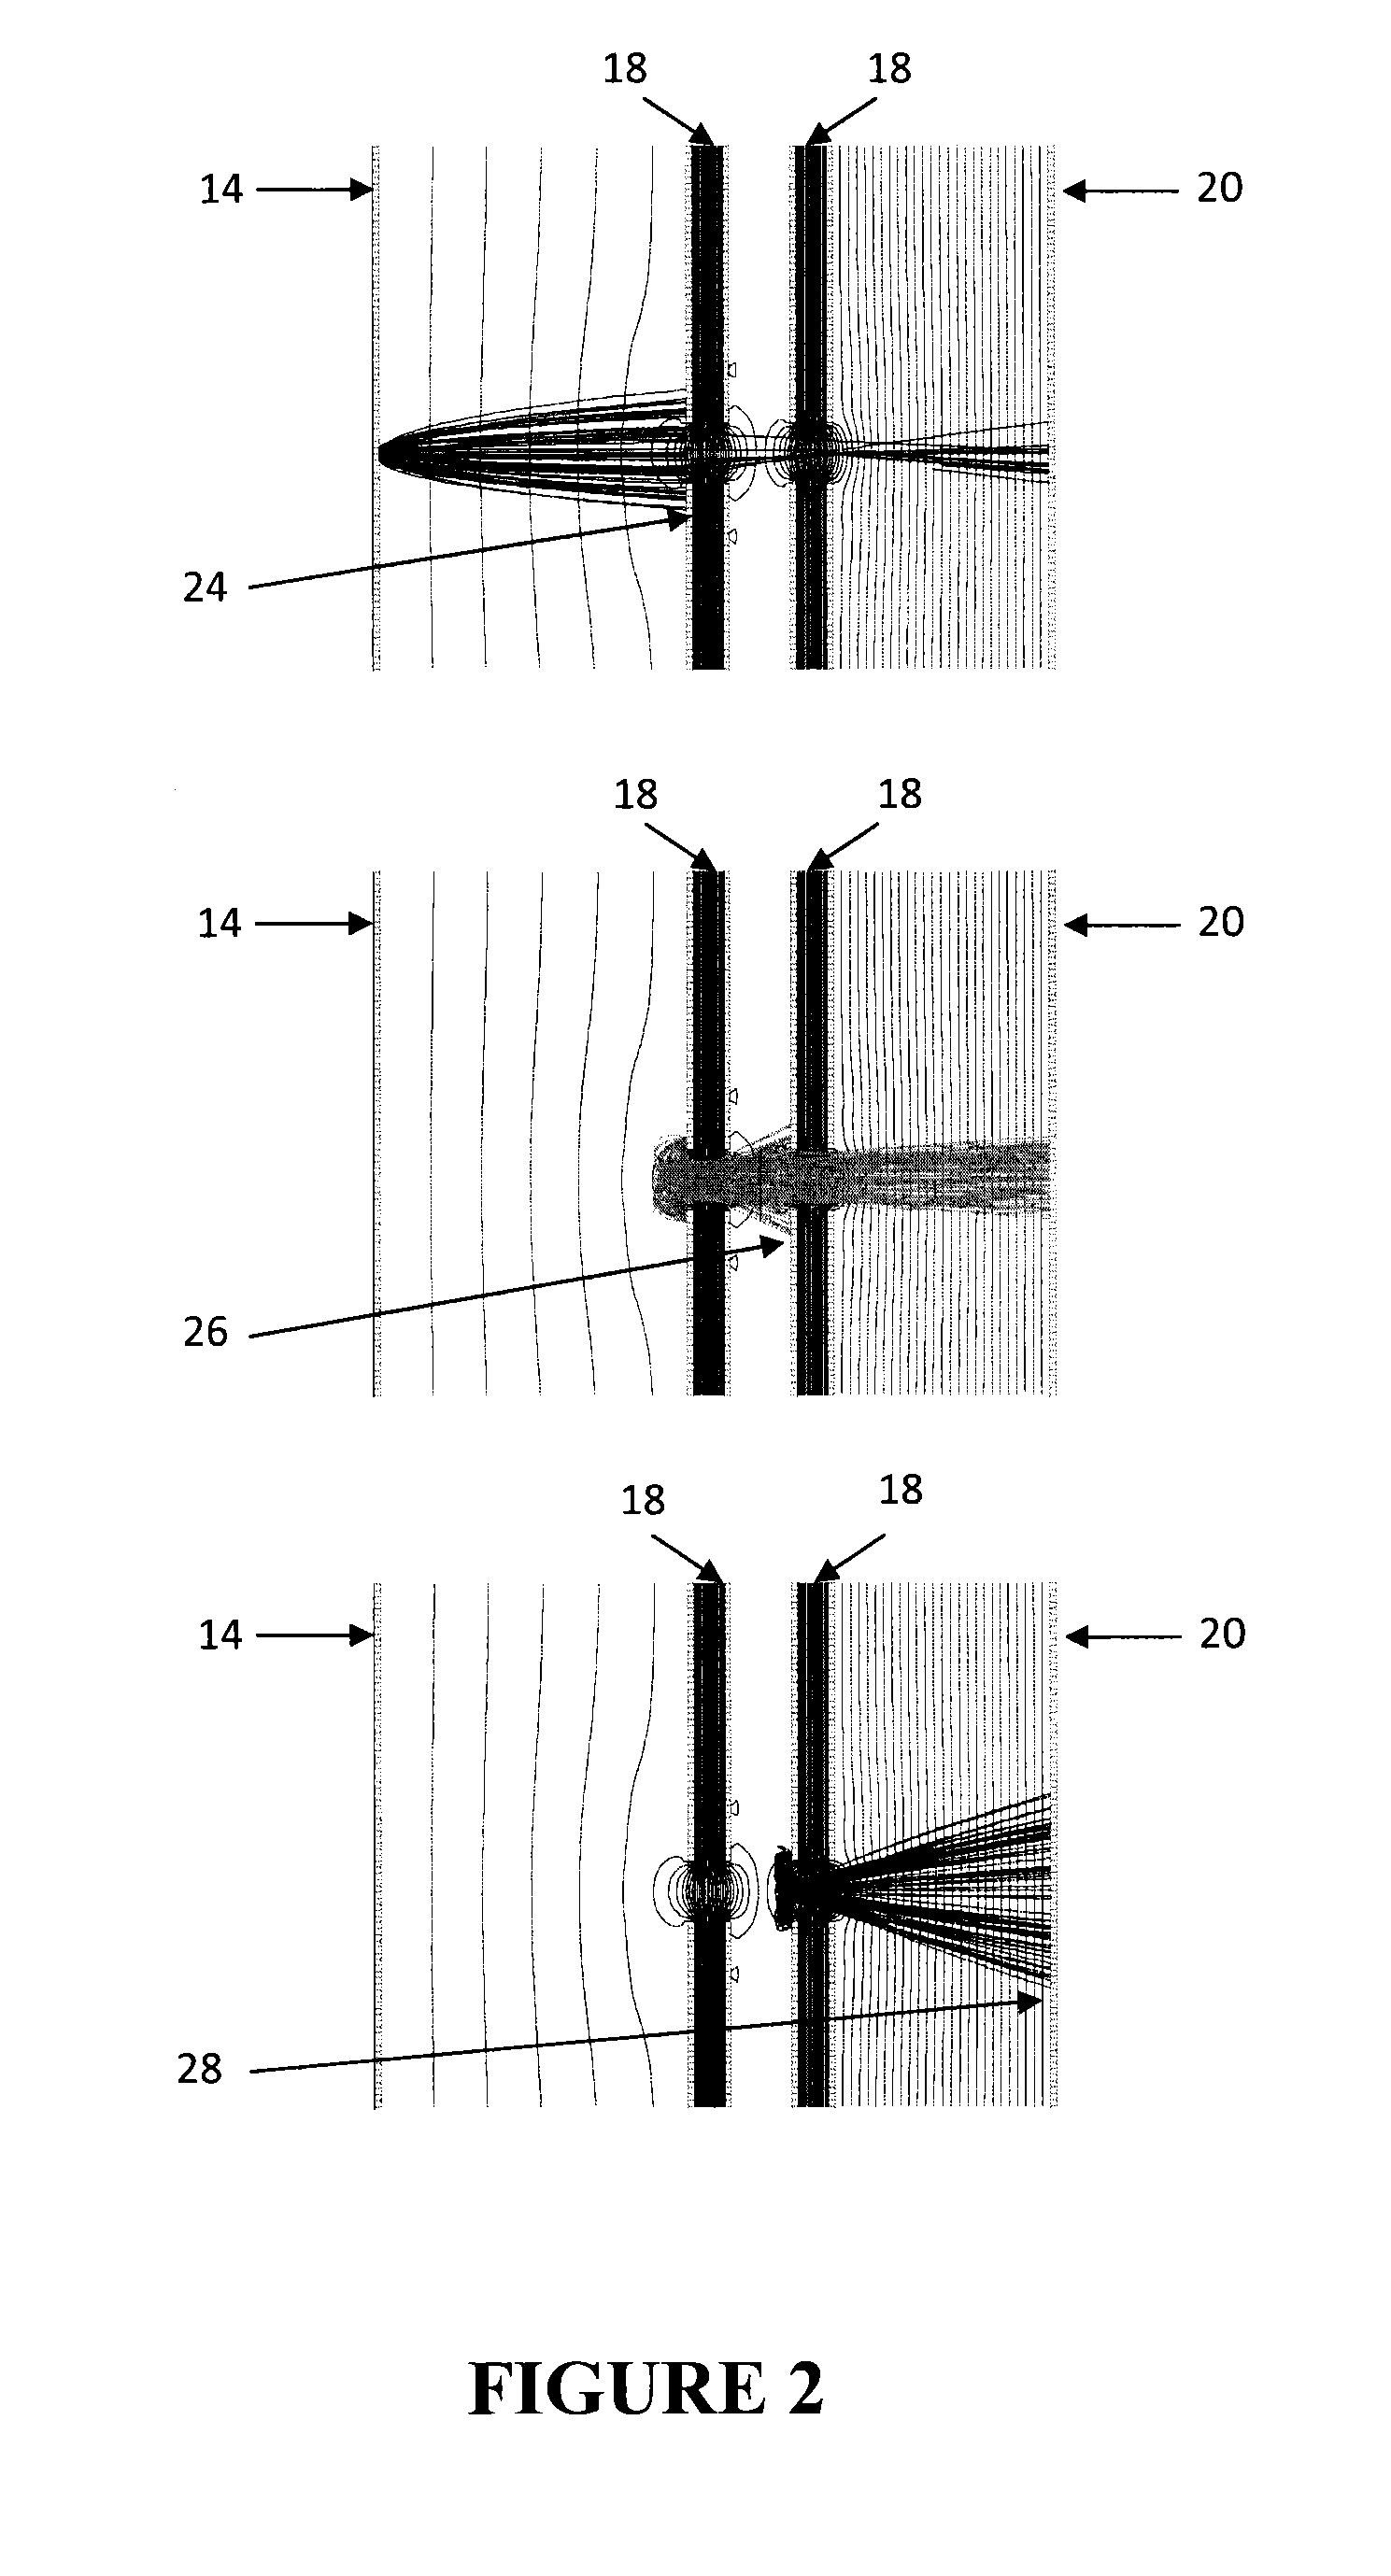 Microstructure photomultiplier assembly